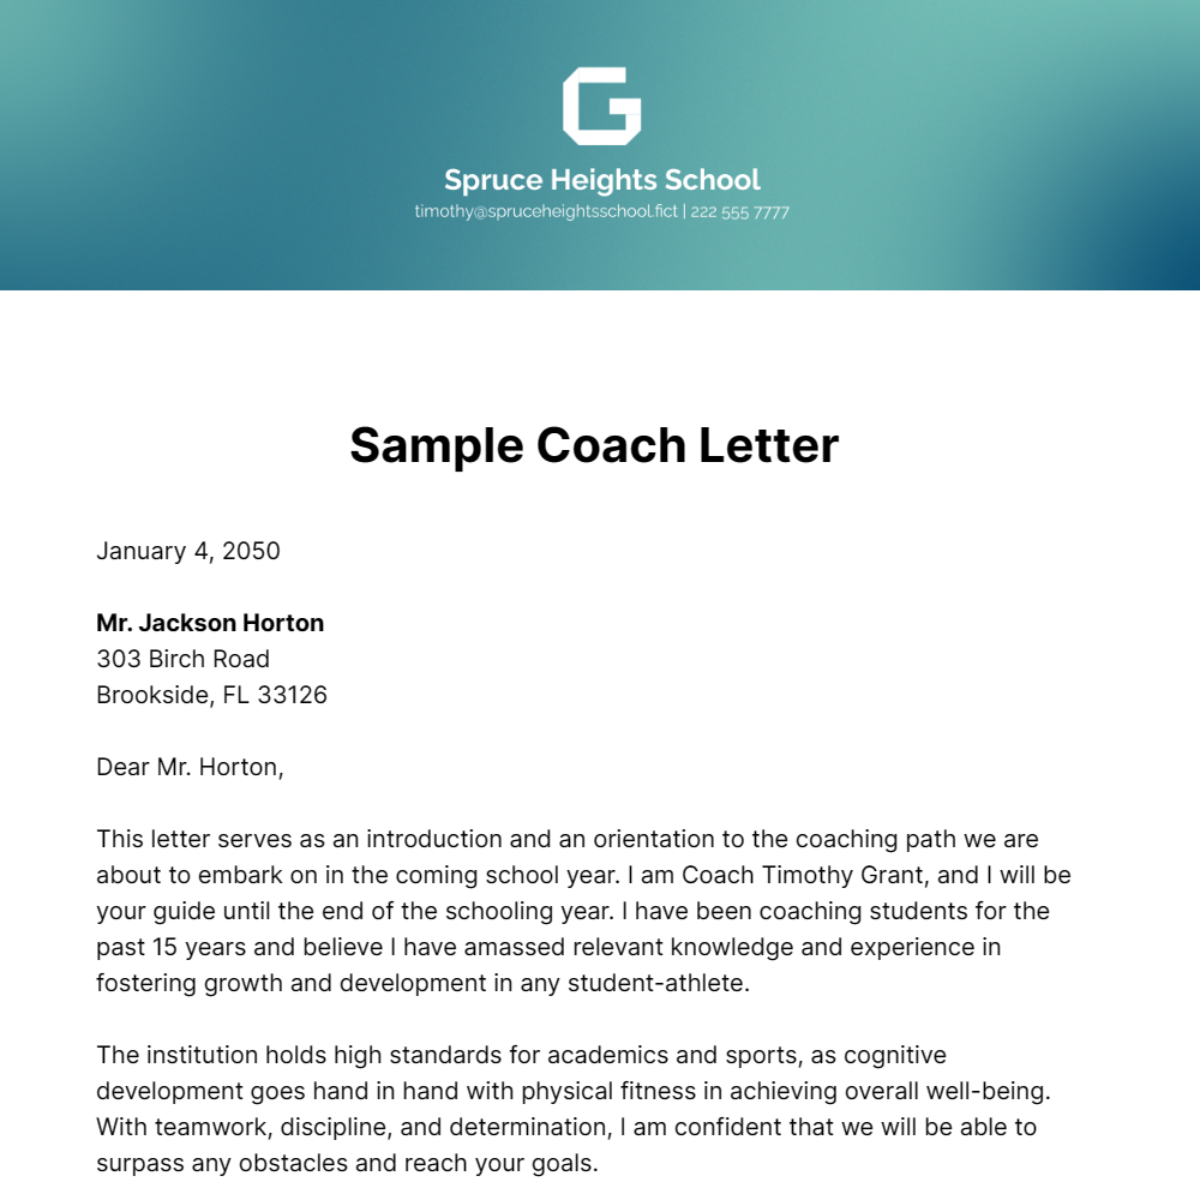 Sample Coach Letter Template